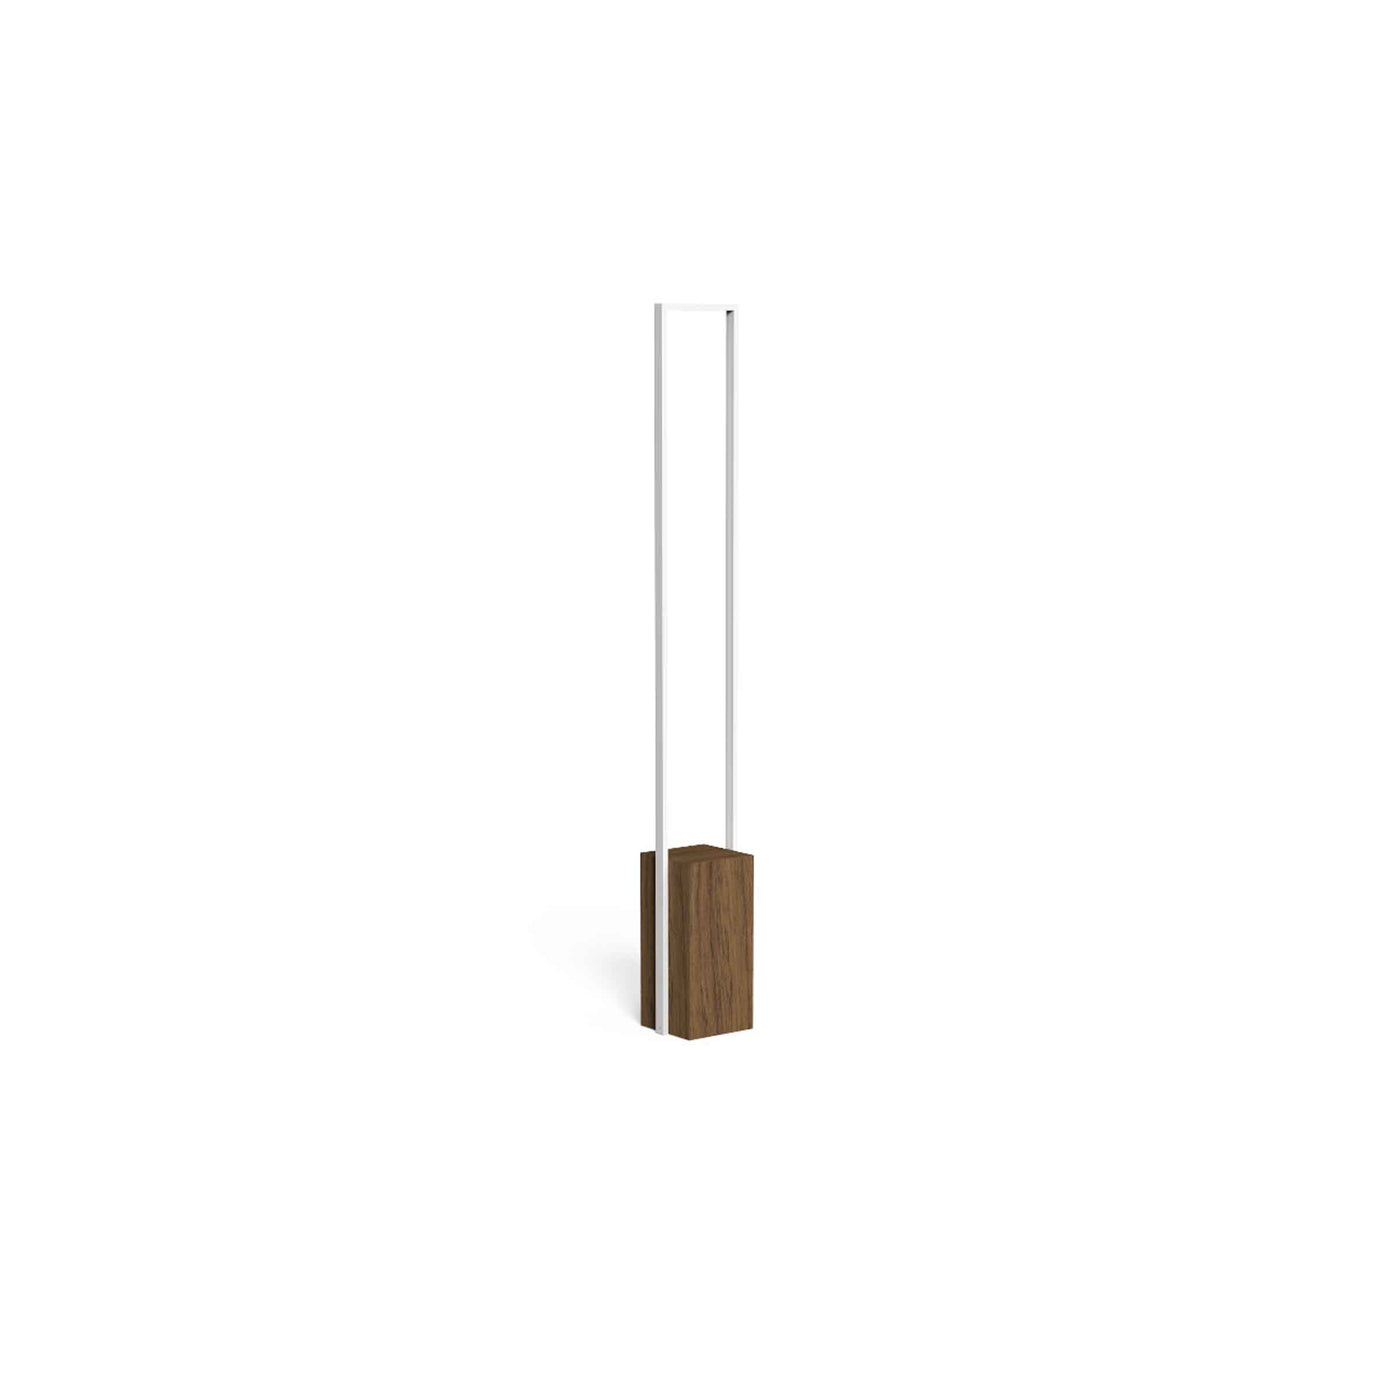 Outdoor Wood and Steel Lamp CASILDA by Ramón Esteve for Talenti 011